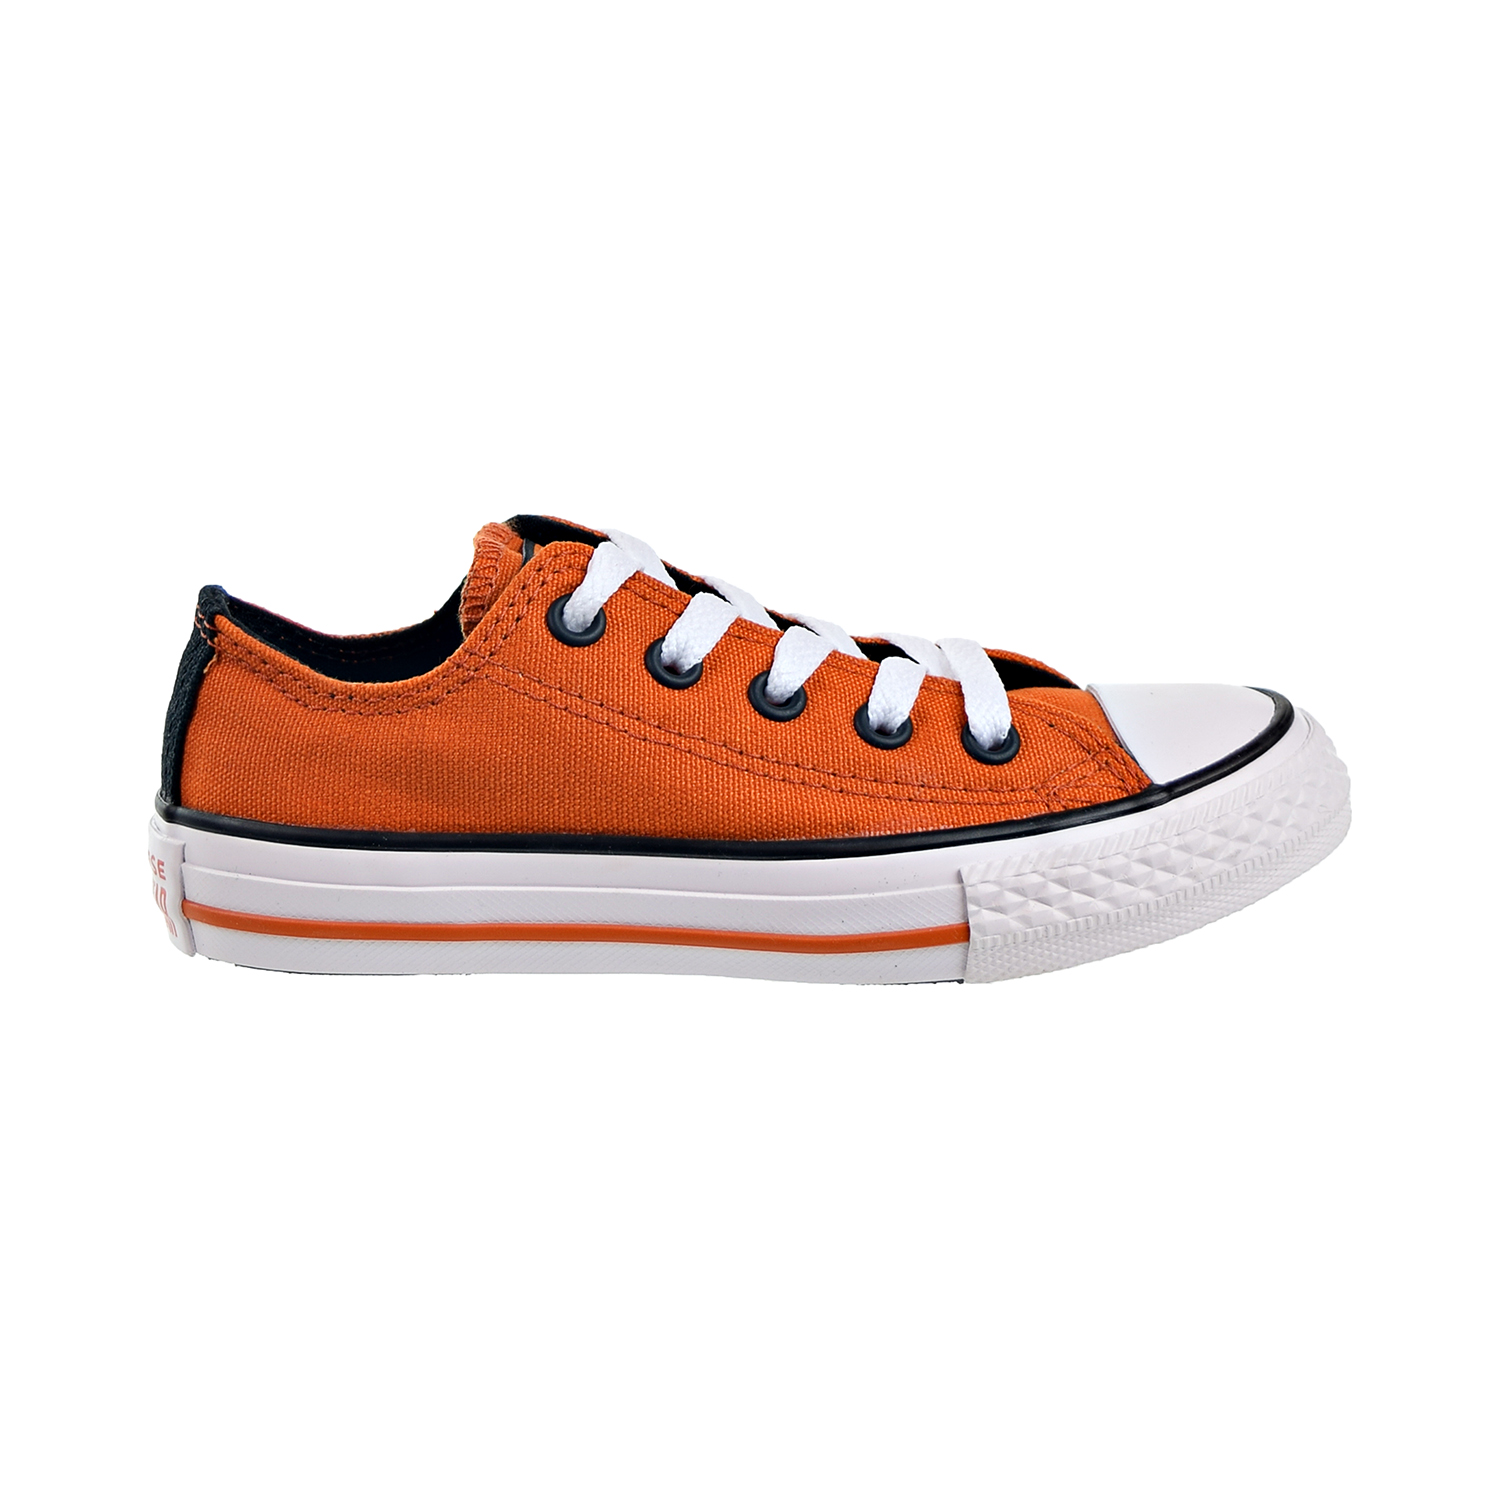 Converse Chuck Taylor All Star Ox Big Kids Shoes Campfire Orange-Black-White 661864f - image 1 of 6